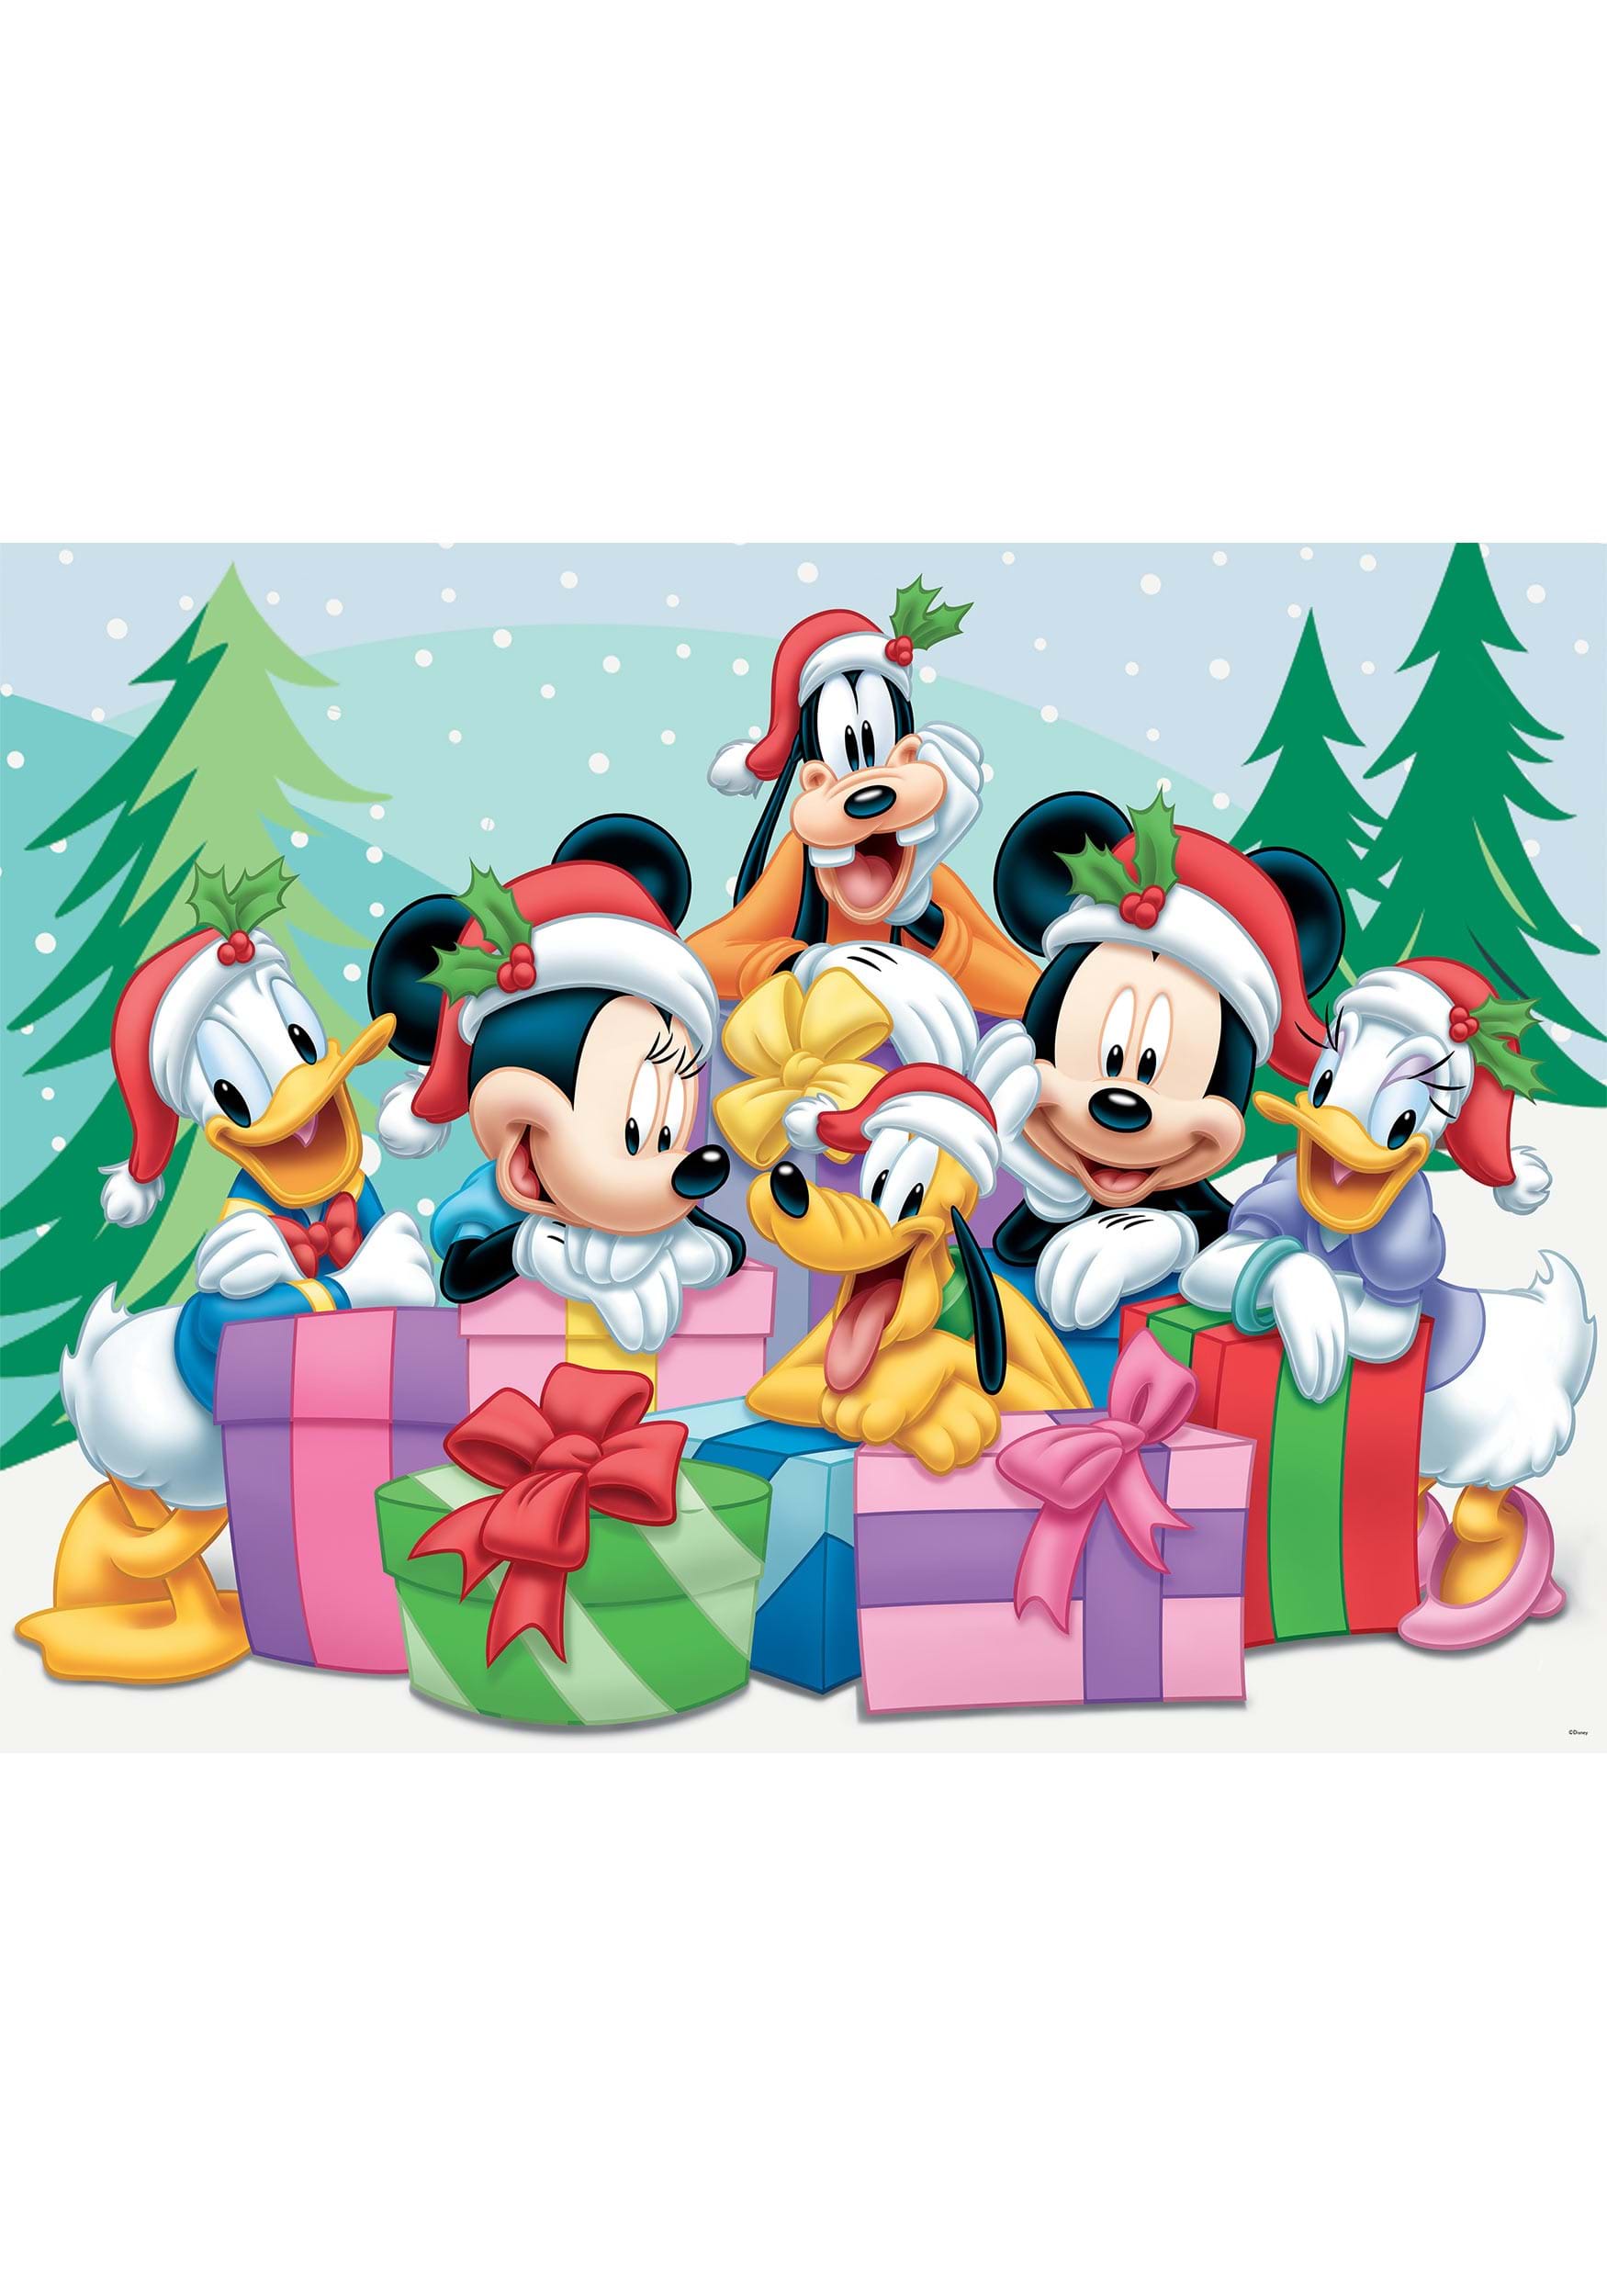 5 In 1, 300/500/750 Piece Multi-Pack -  Disney Holiday Jigsaw Puzzles